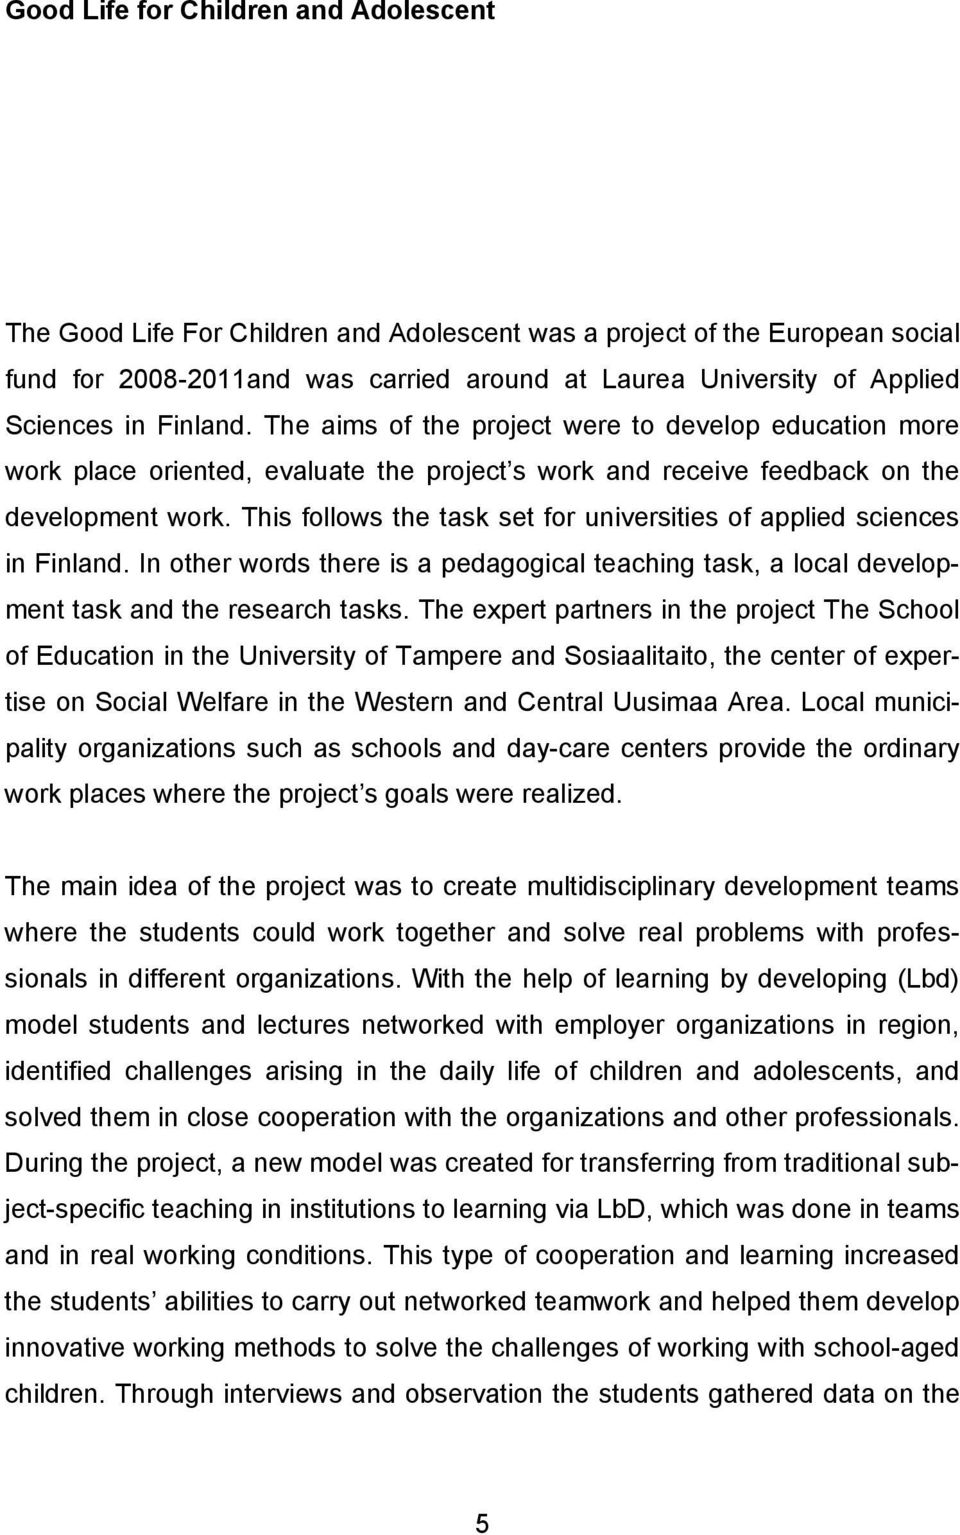 This follows the task set for universities of applied sciences in Finland. In other words there is a pedagogical teaching task, a local development task and the research tasks.